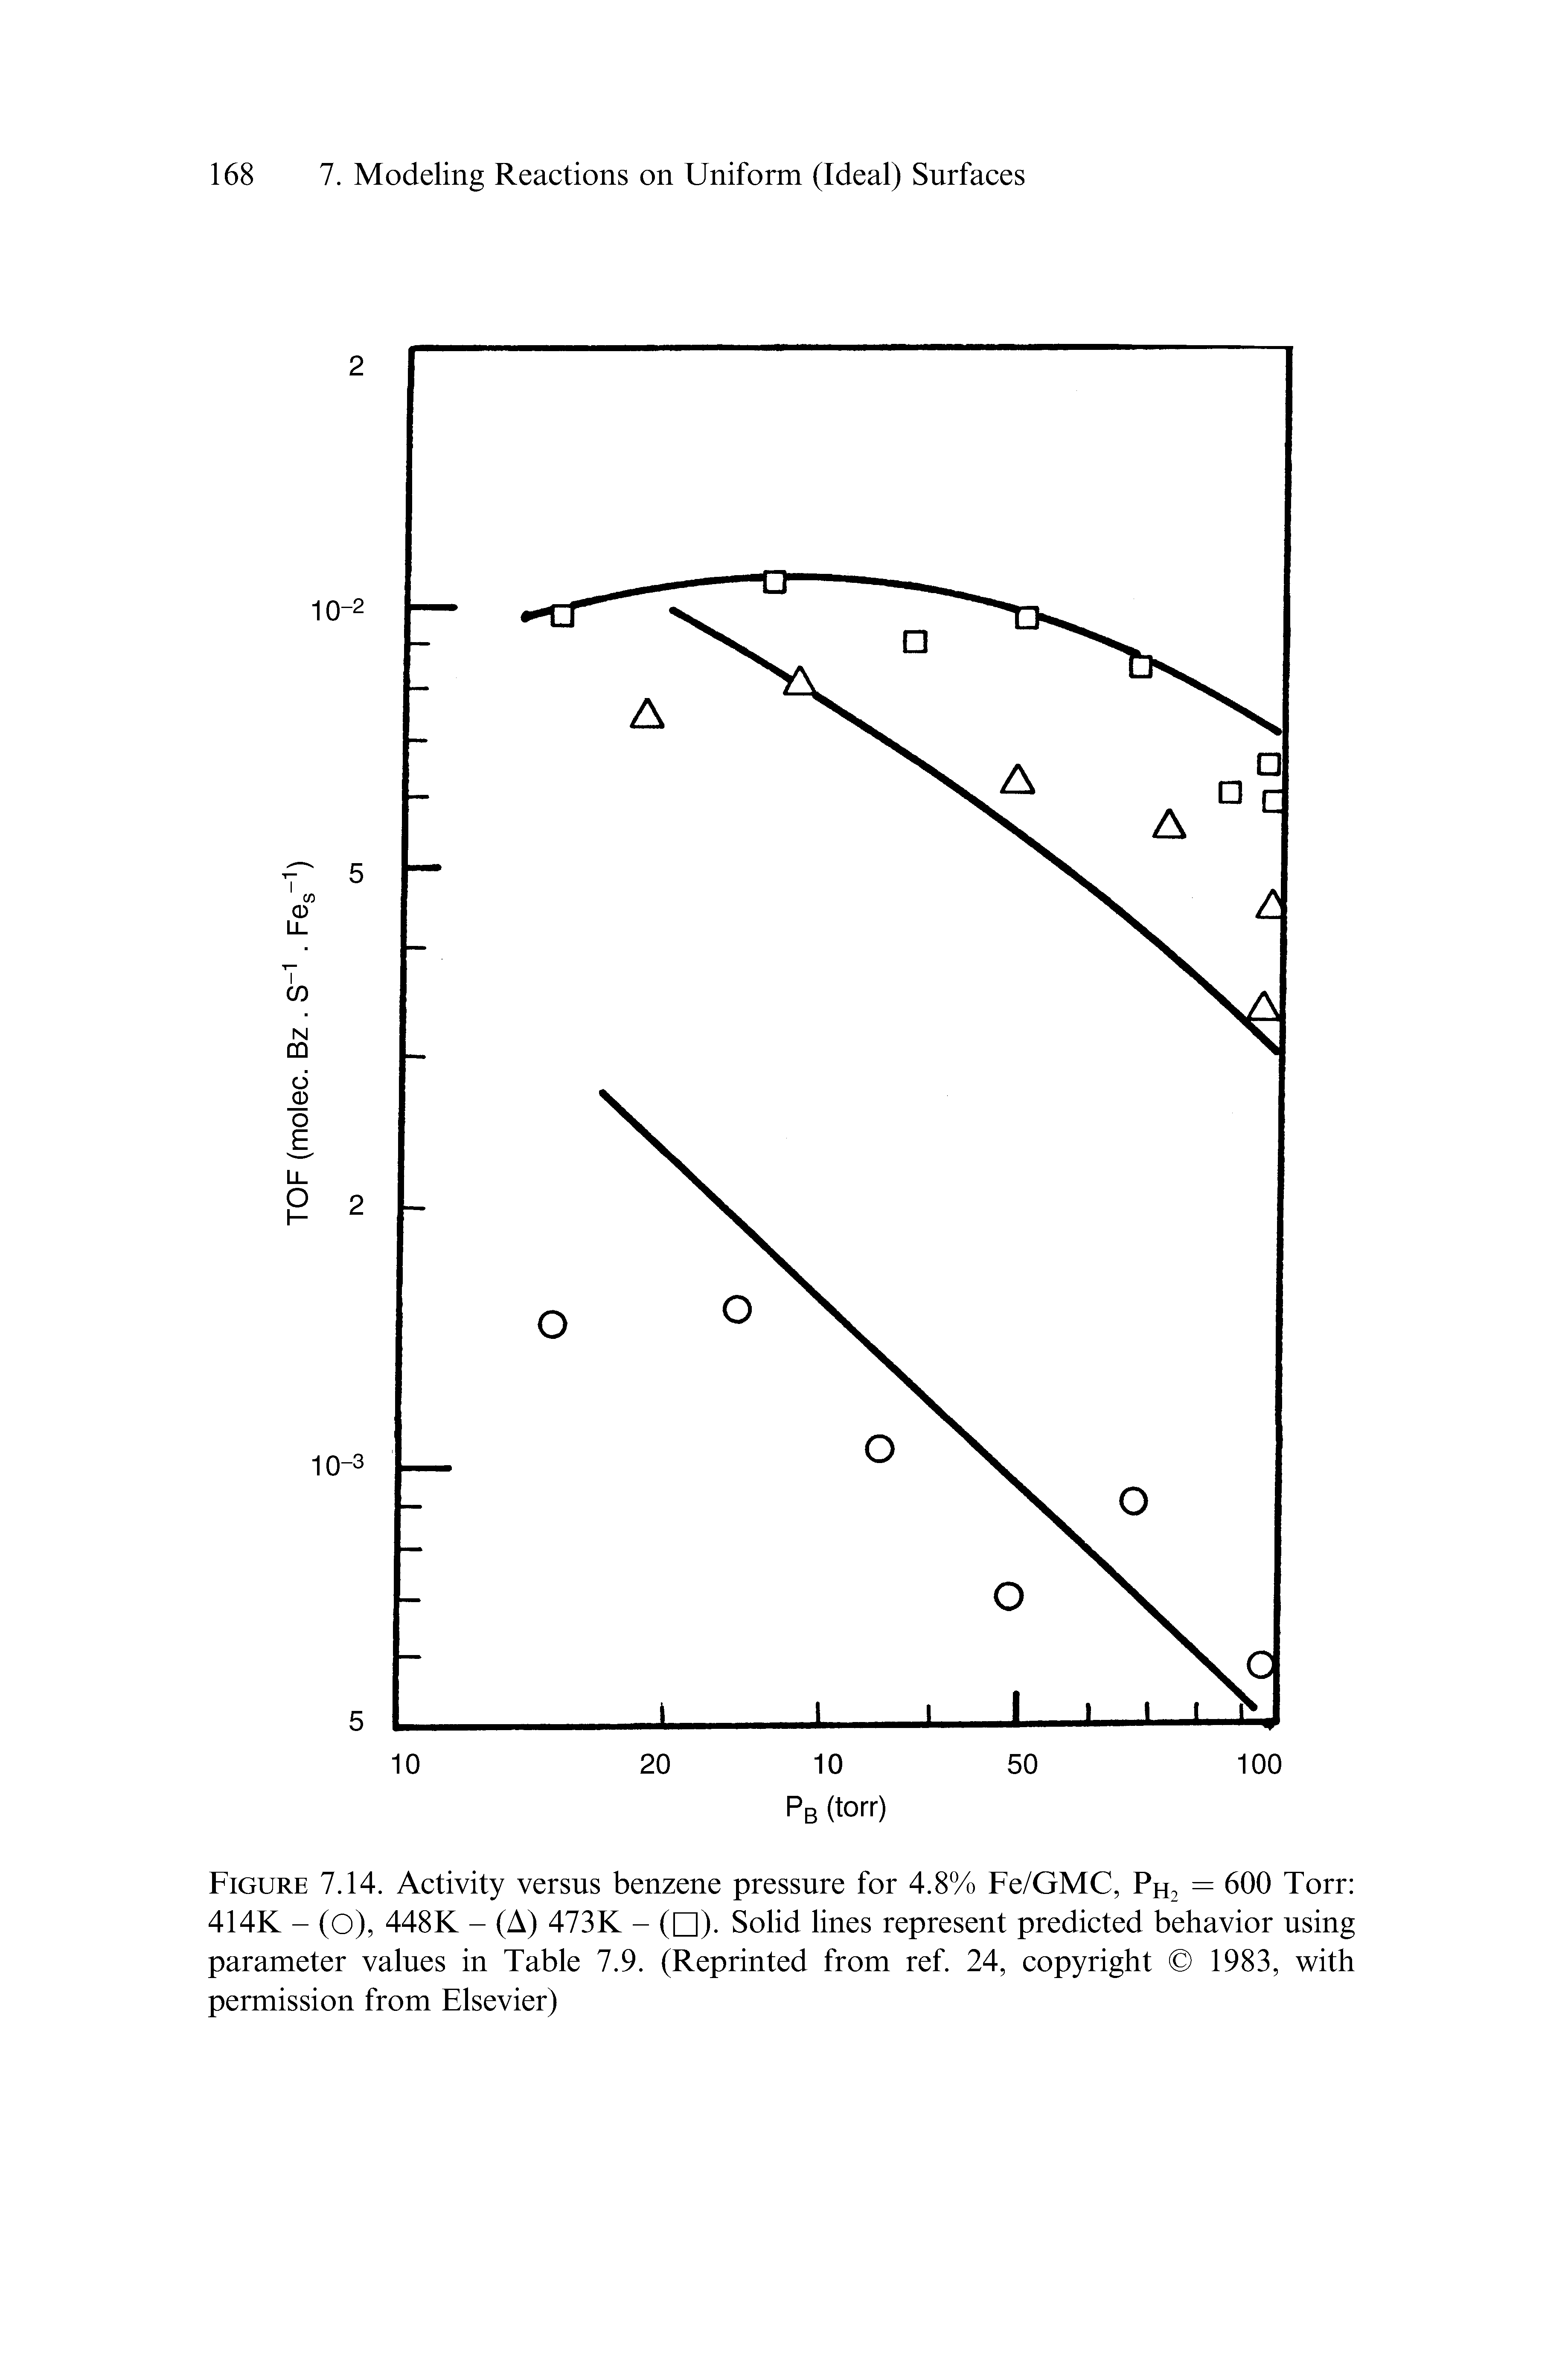 Figure 7.14. Activity versus benzene pressure for 4.8% Fe/GMC, Ph2 = 600 Torr 414K - (O), 448K - (A) 473K - ( ). Solid lines represent predicted behavior using parameter values in Table 7.9. (Reprinted from ref. 24, copyright 1983, with permission from Elsevier)...